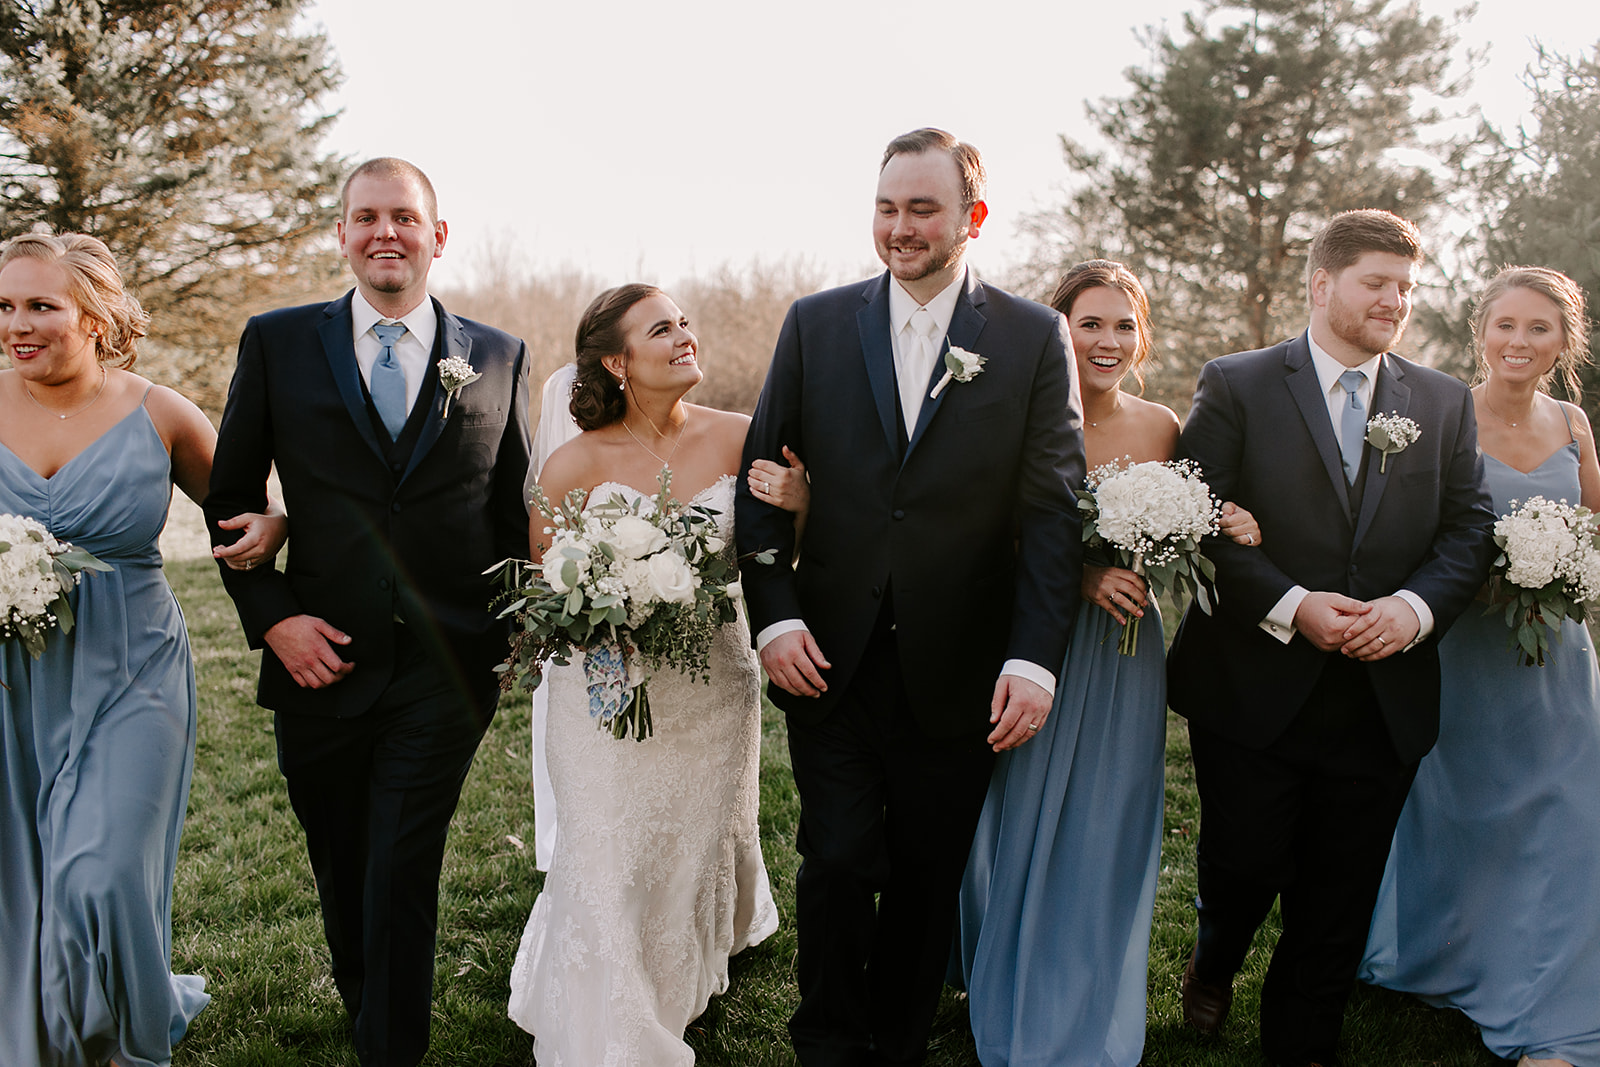 Lauren_and_Andrew_Mustard_Seed_Gardens_Noblesville_Indiana_by_Emily_Wehner_Photography-664.jpg